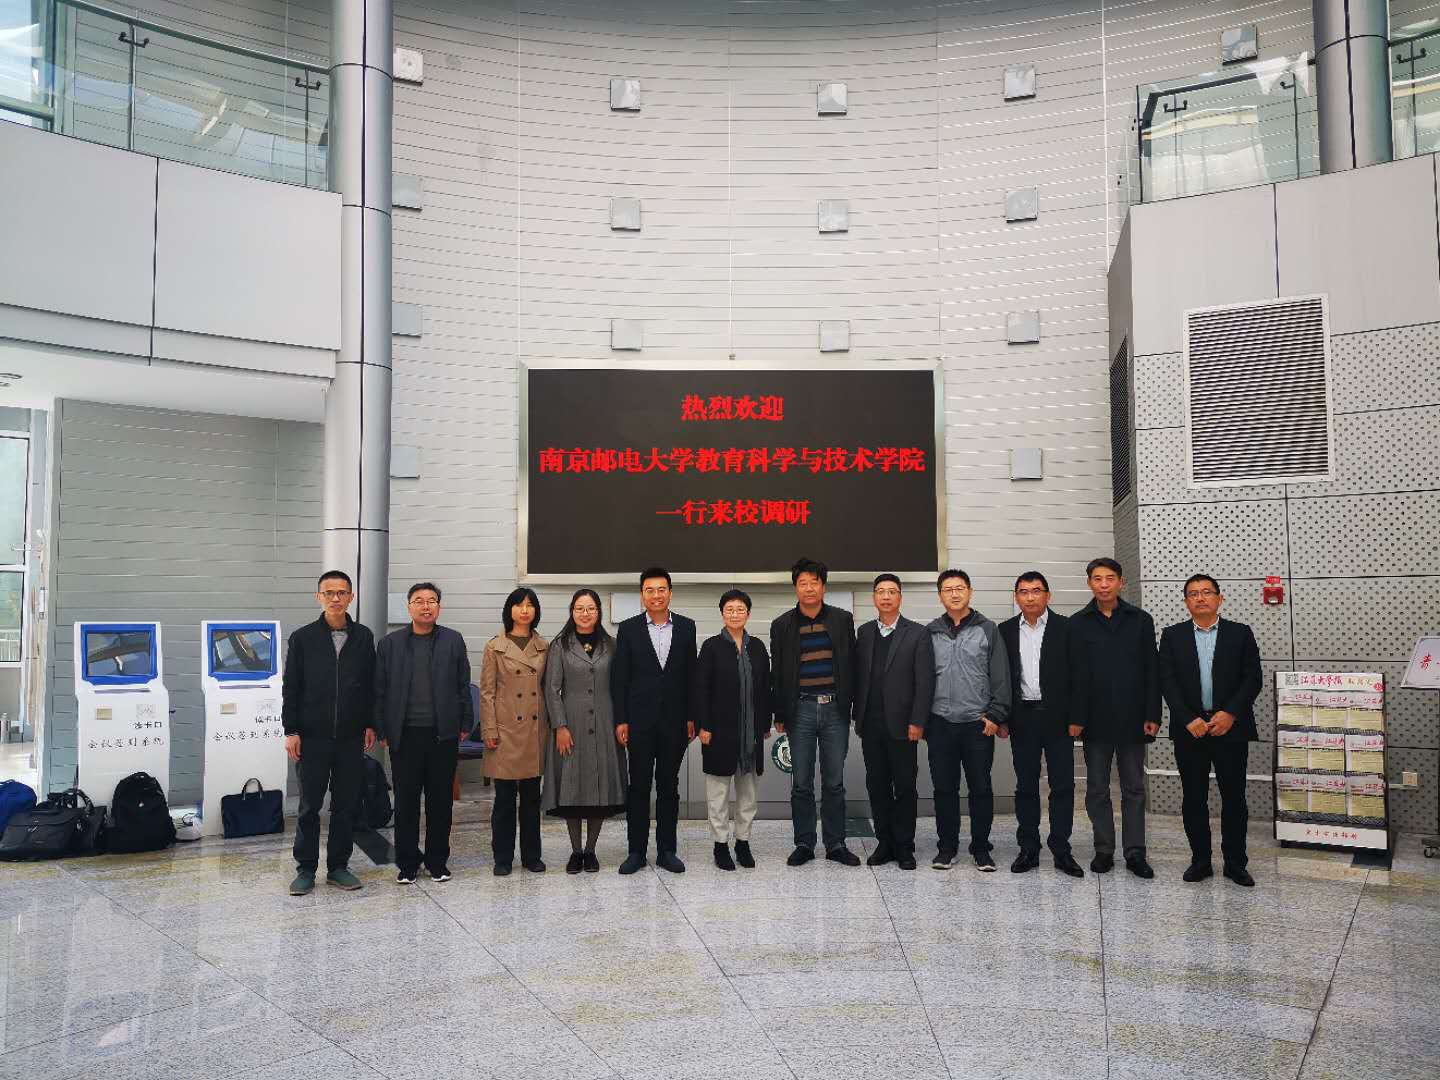 A delegation from the School of Educational Science and Technology of Nanjing...